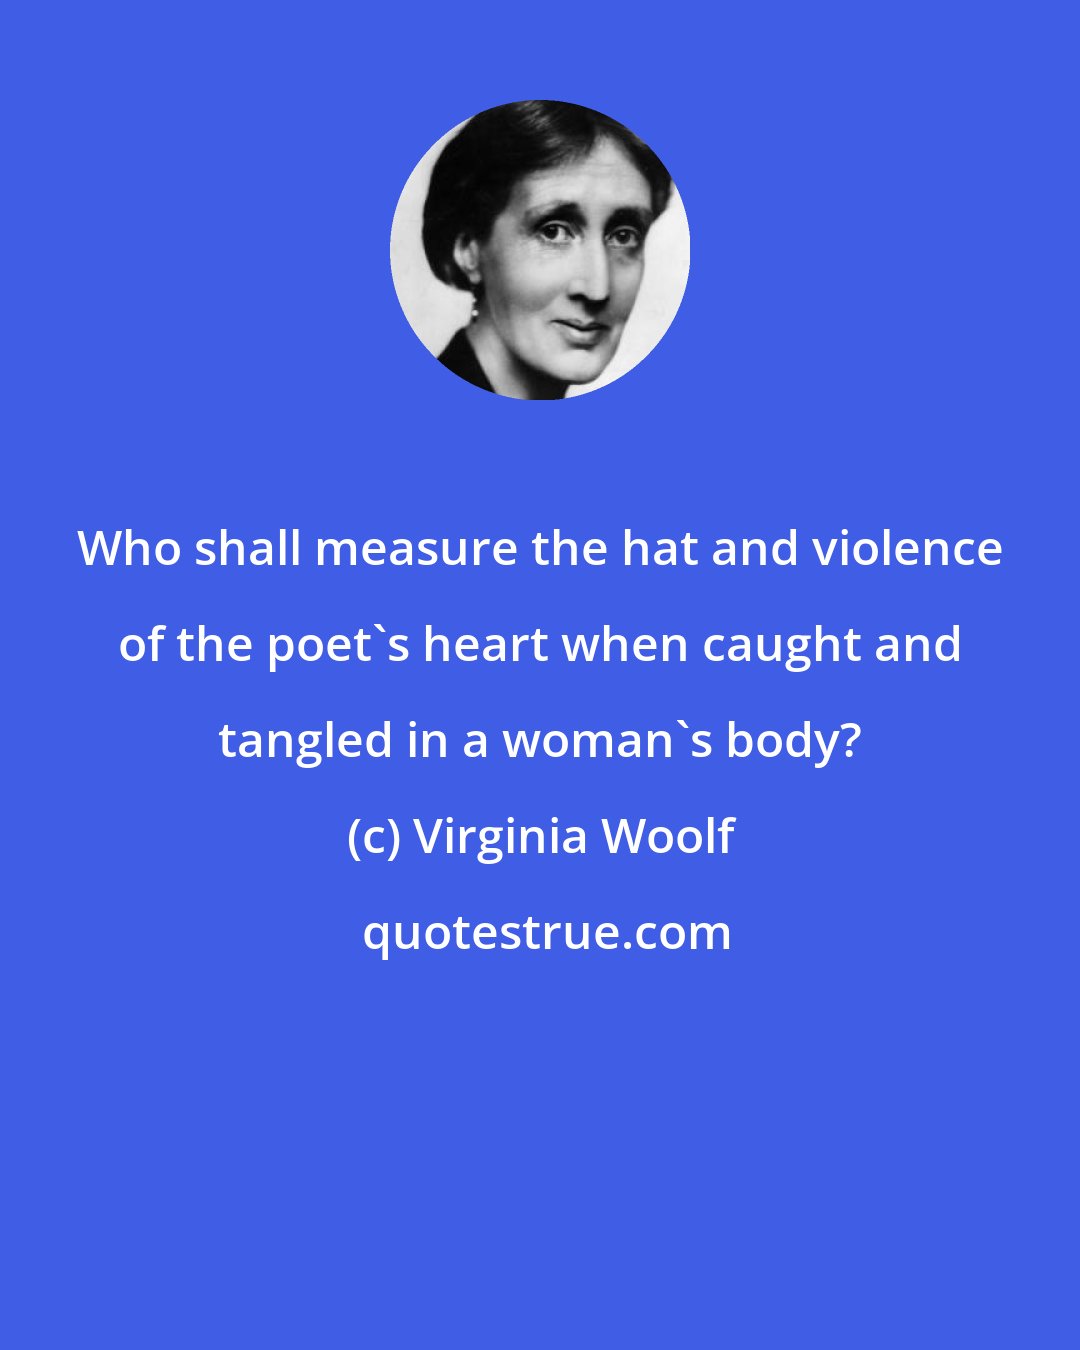 Virginia Woolf: Who shall measure the hat and violence of the poet's heart when caught and tangled in a woman's body?